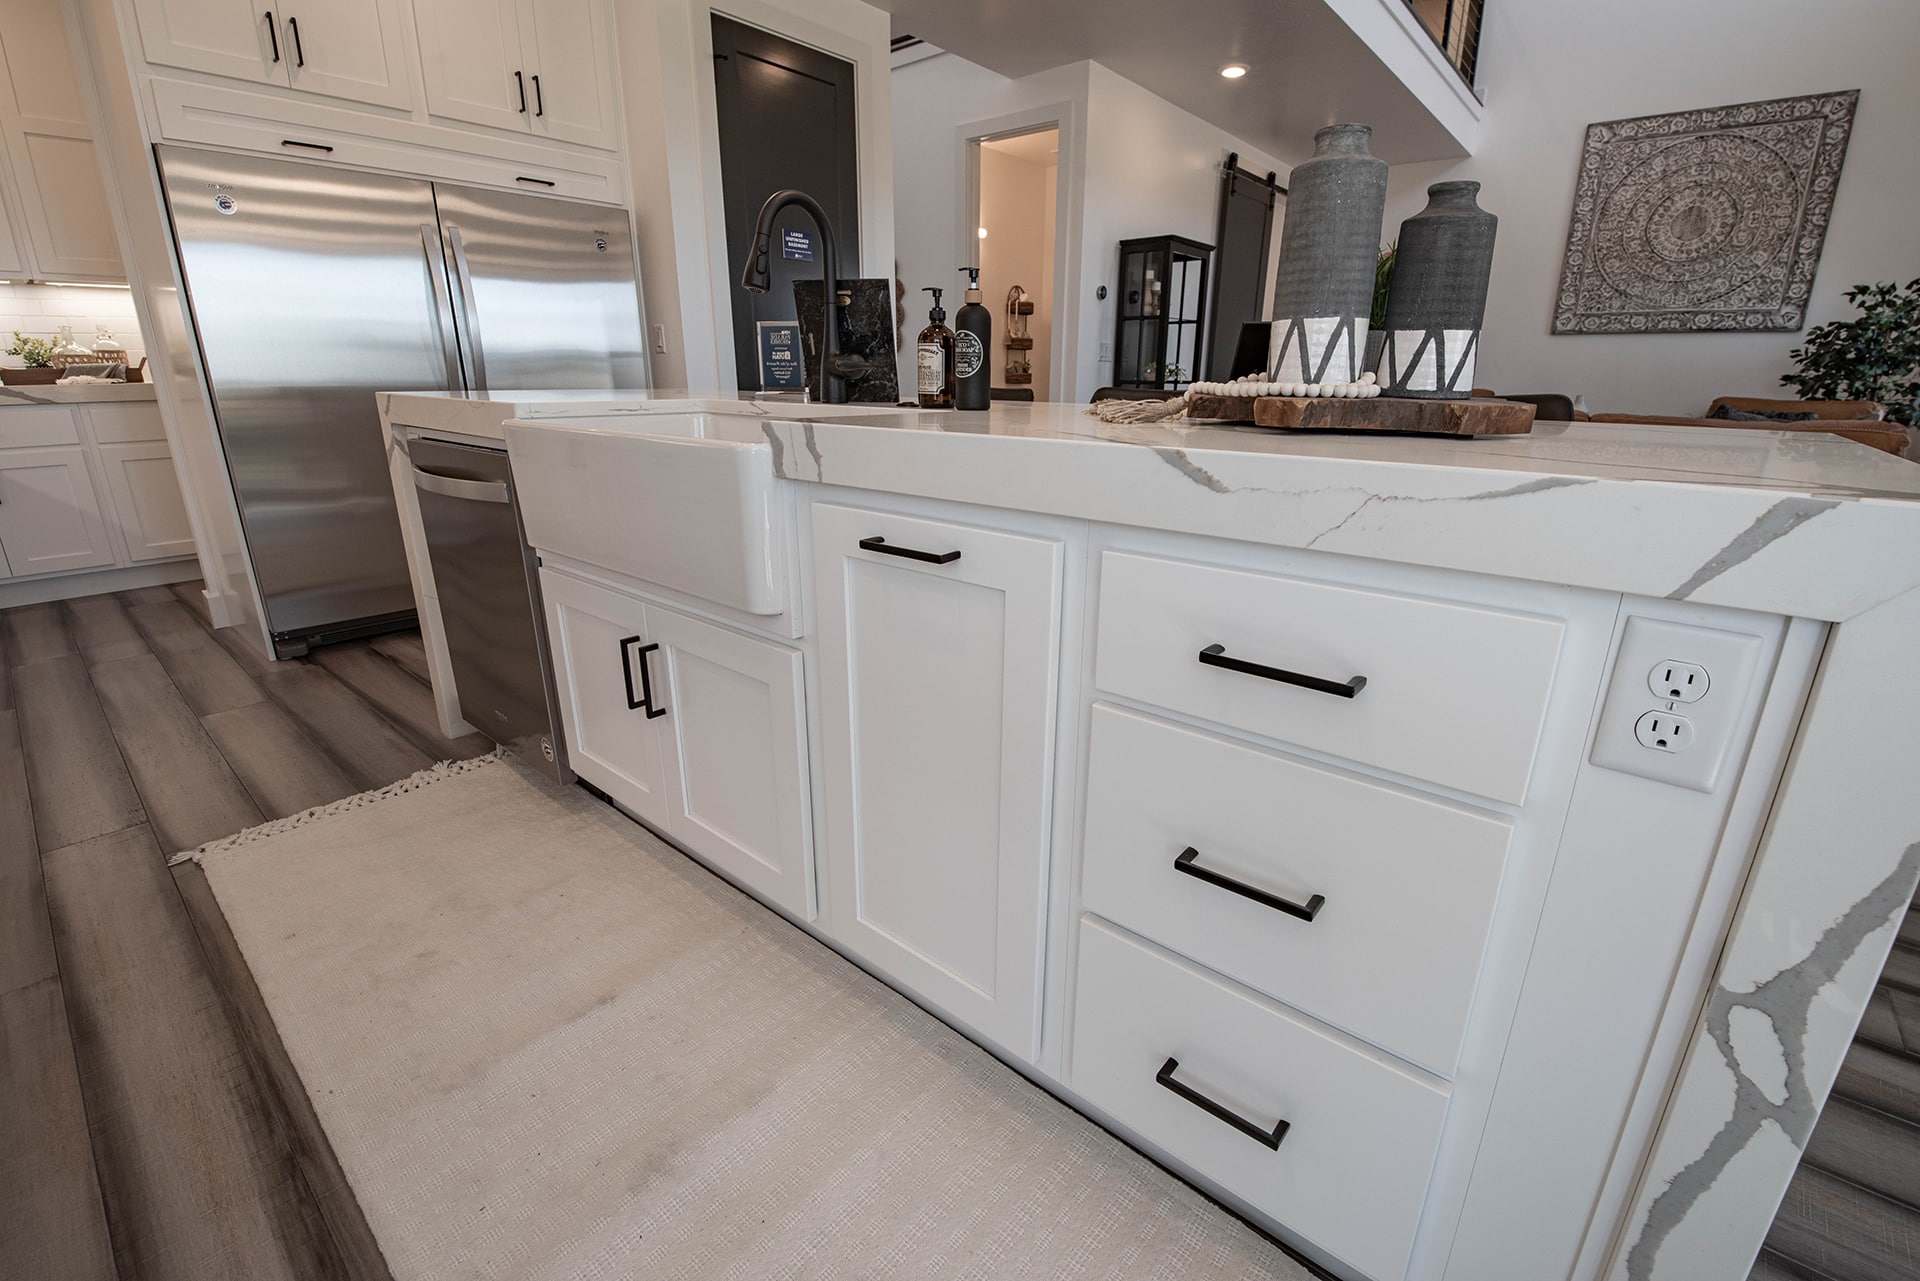 Kitchen Cabinets and Countertops - Plain City, UT